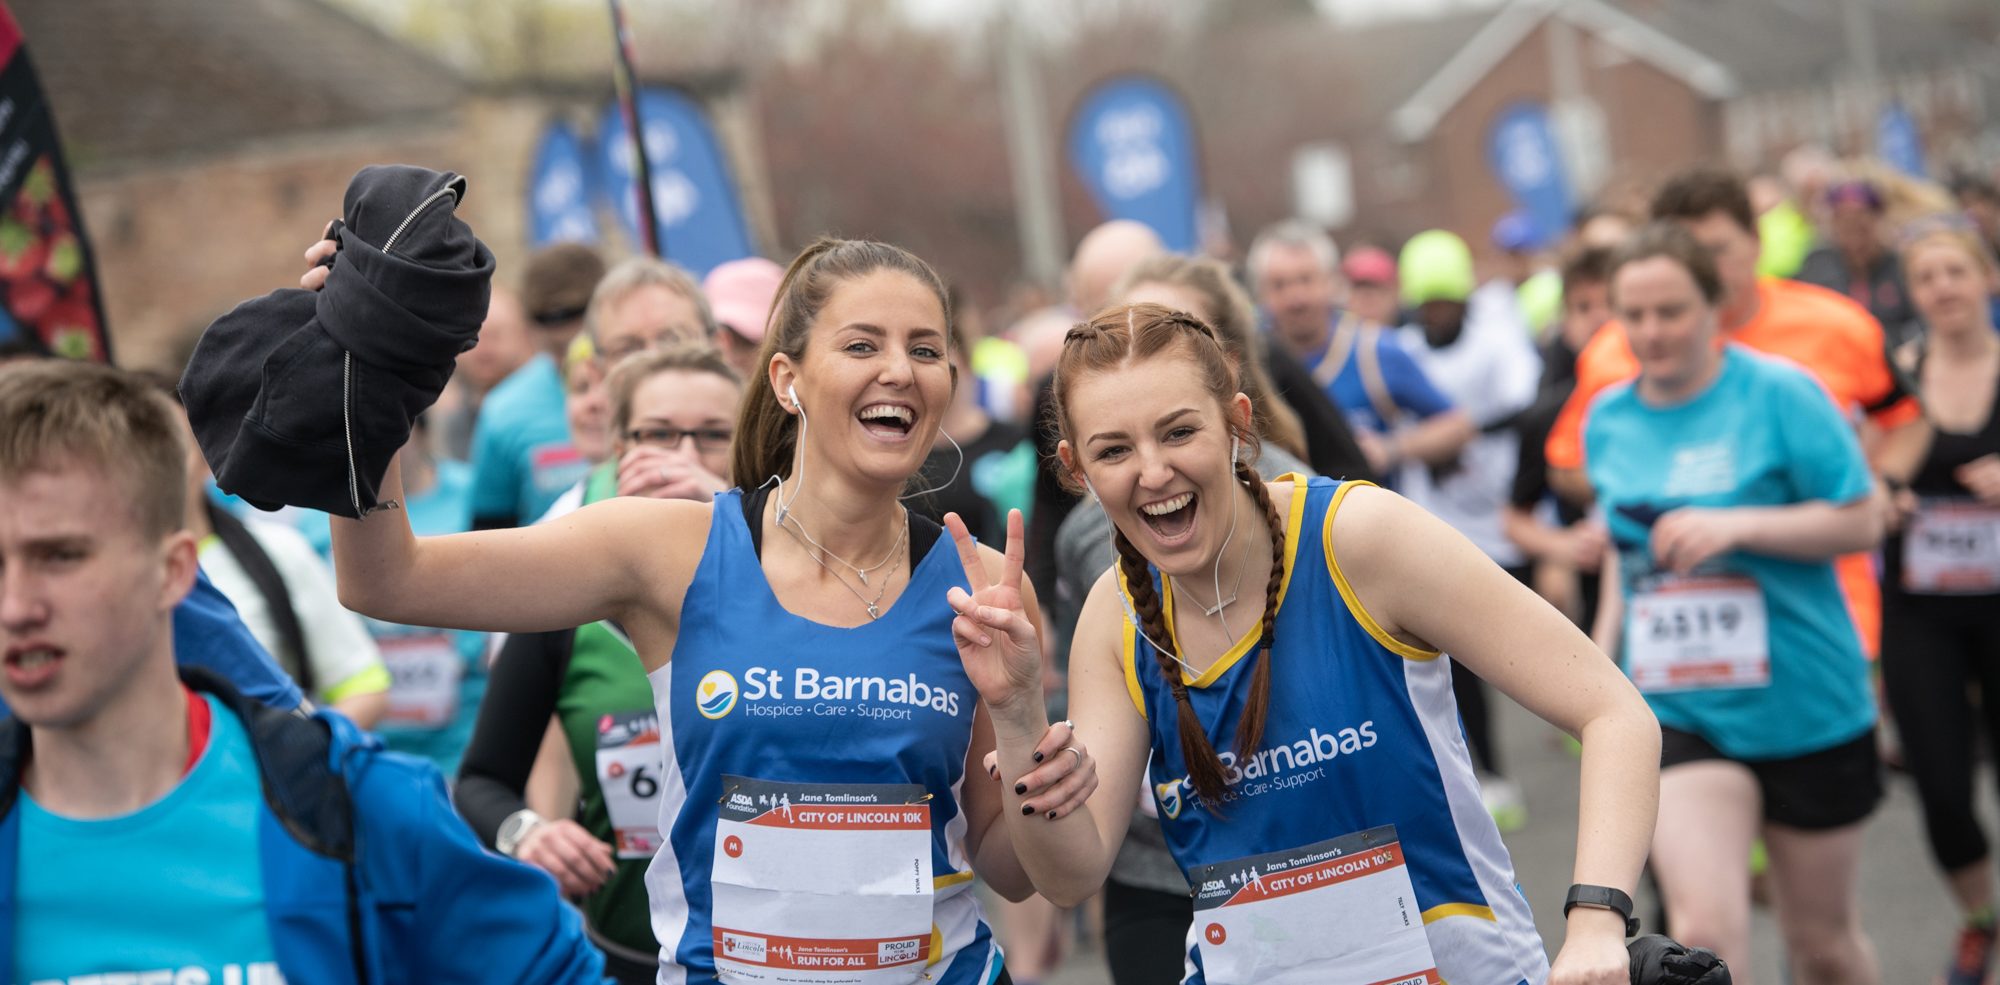 Two woman, wearing St Barnabas running shirts, taking part inthe city of Lincoln 10k in 2019